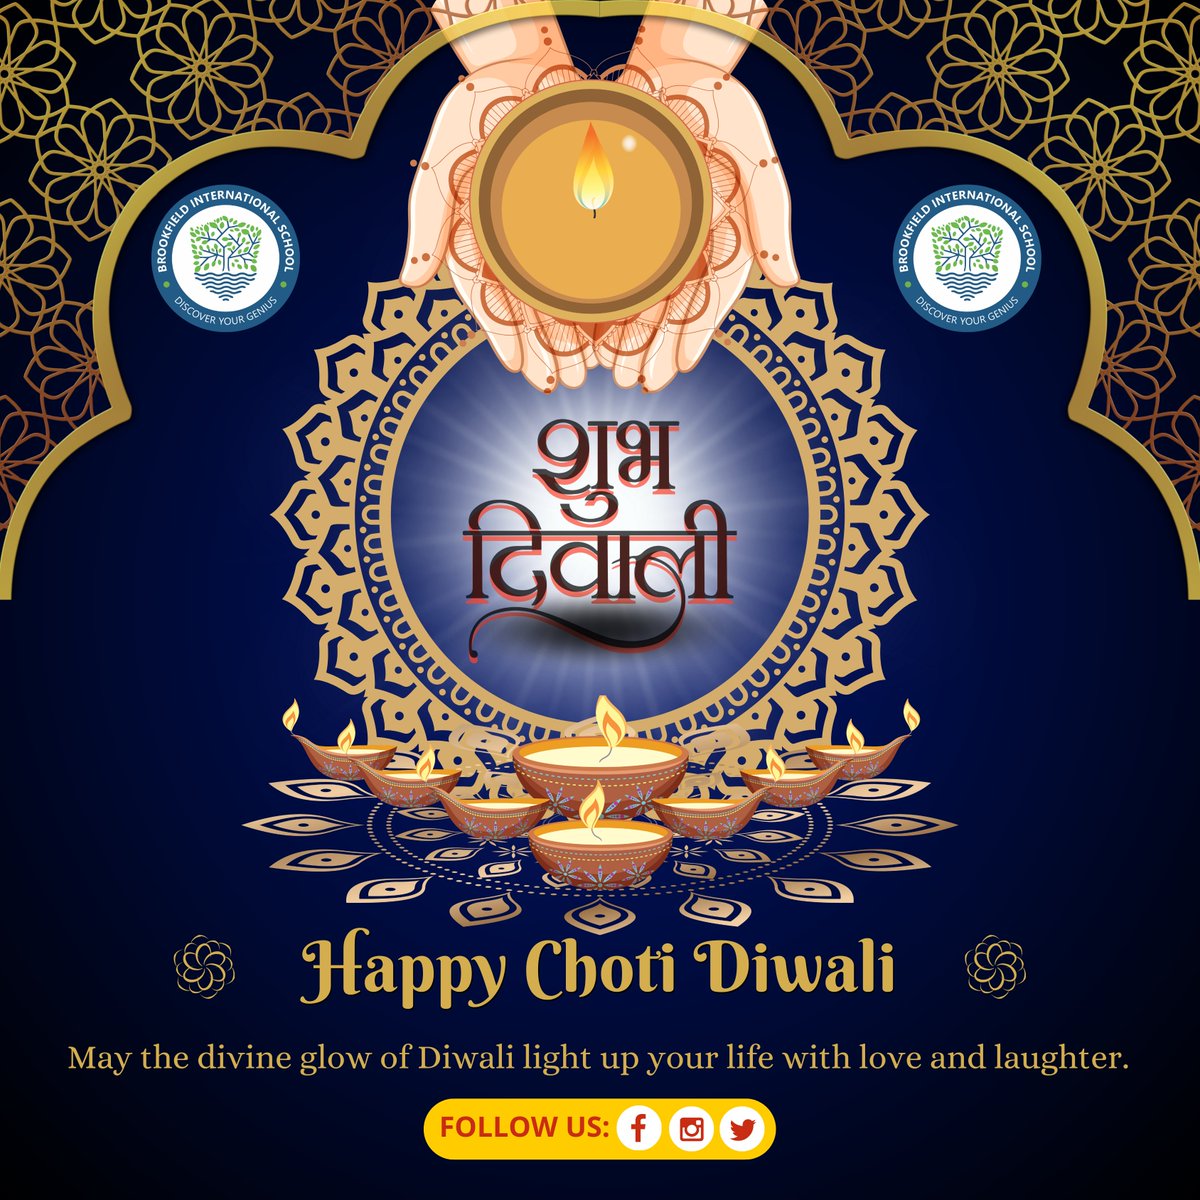 🎇 Happy Choti Diwali from Brookfield International School! 🌟 May this festival of lights fill your life with brightness and joy. 📚💡 Wishing all our students, parents, and staff a prosperous and blissful Choti Diwali! 🙌✨#FestivalOfLights #BrookfieldInternationalSchool 🏫🎉